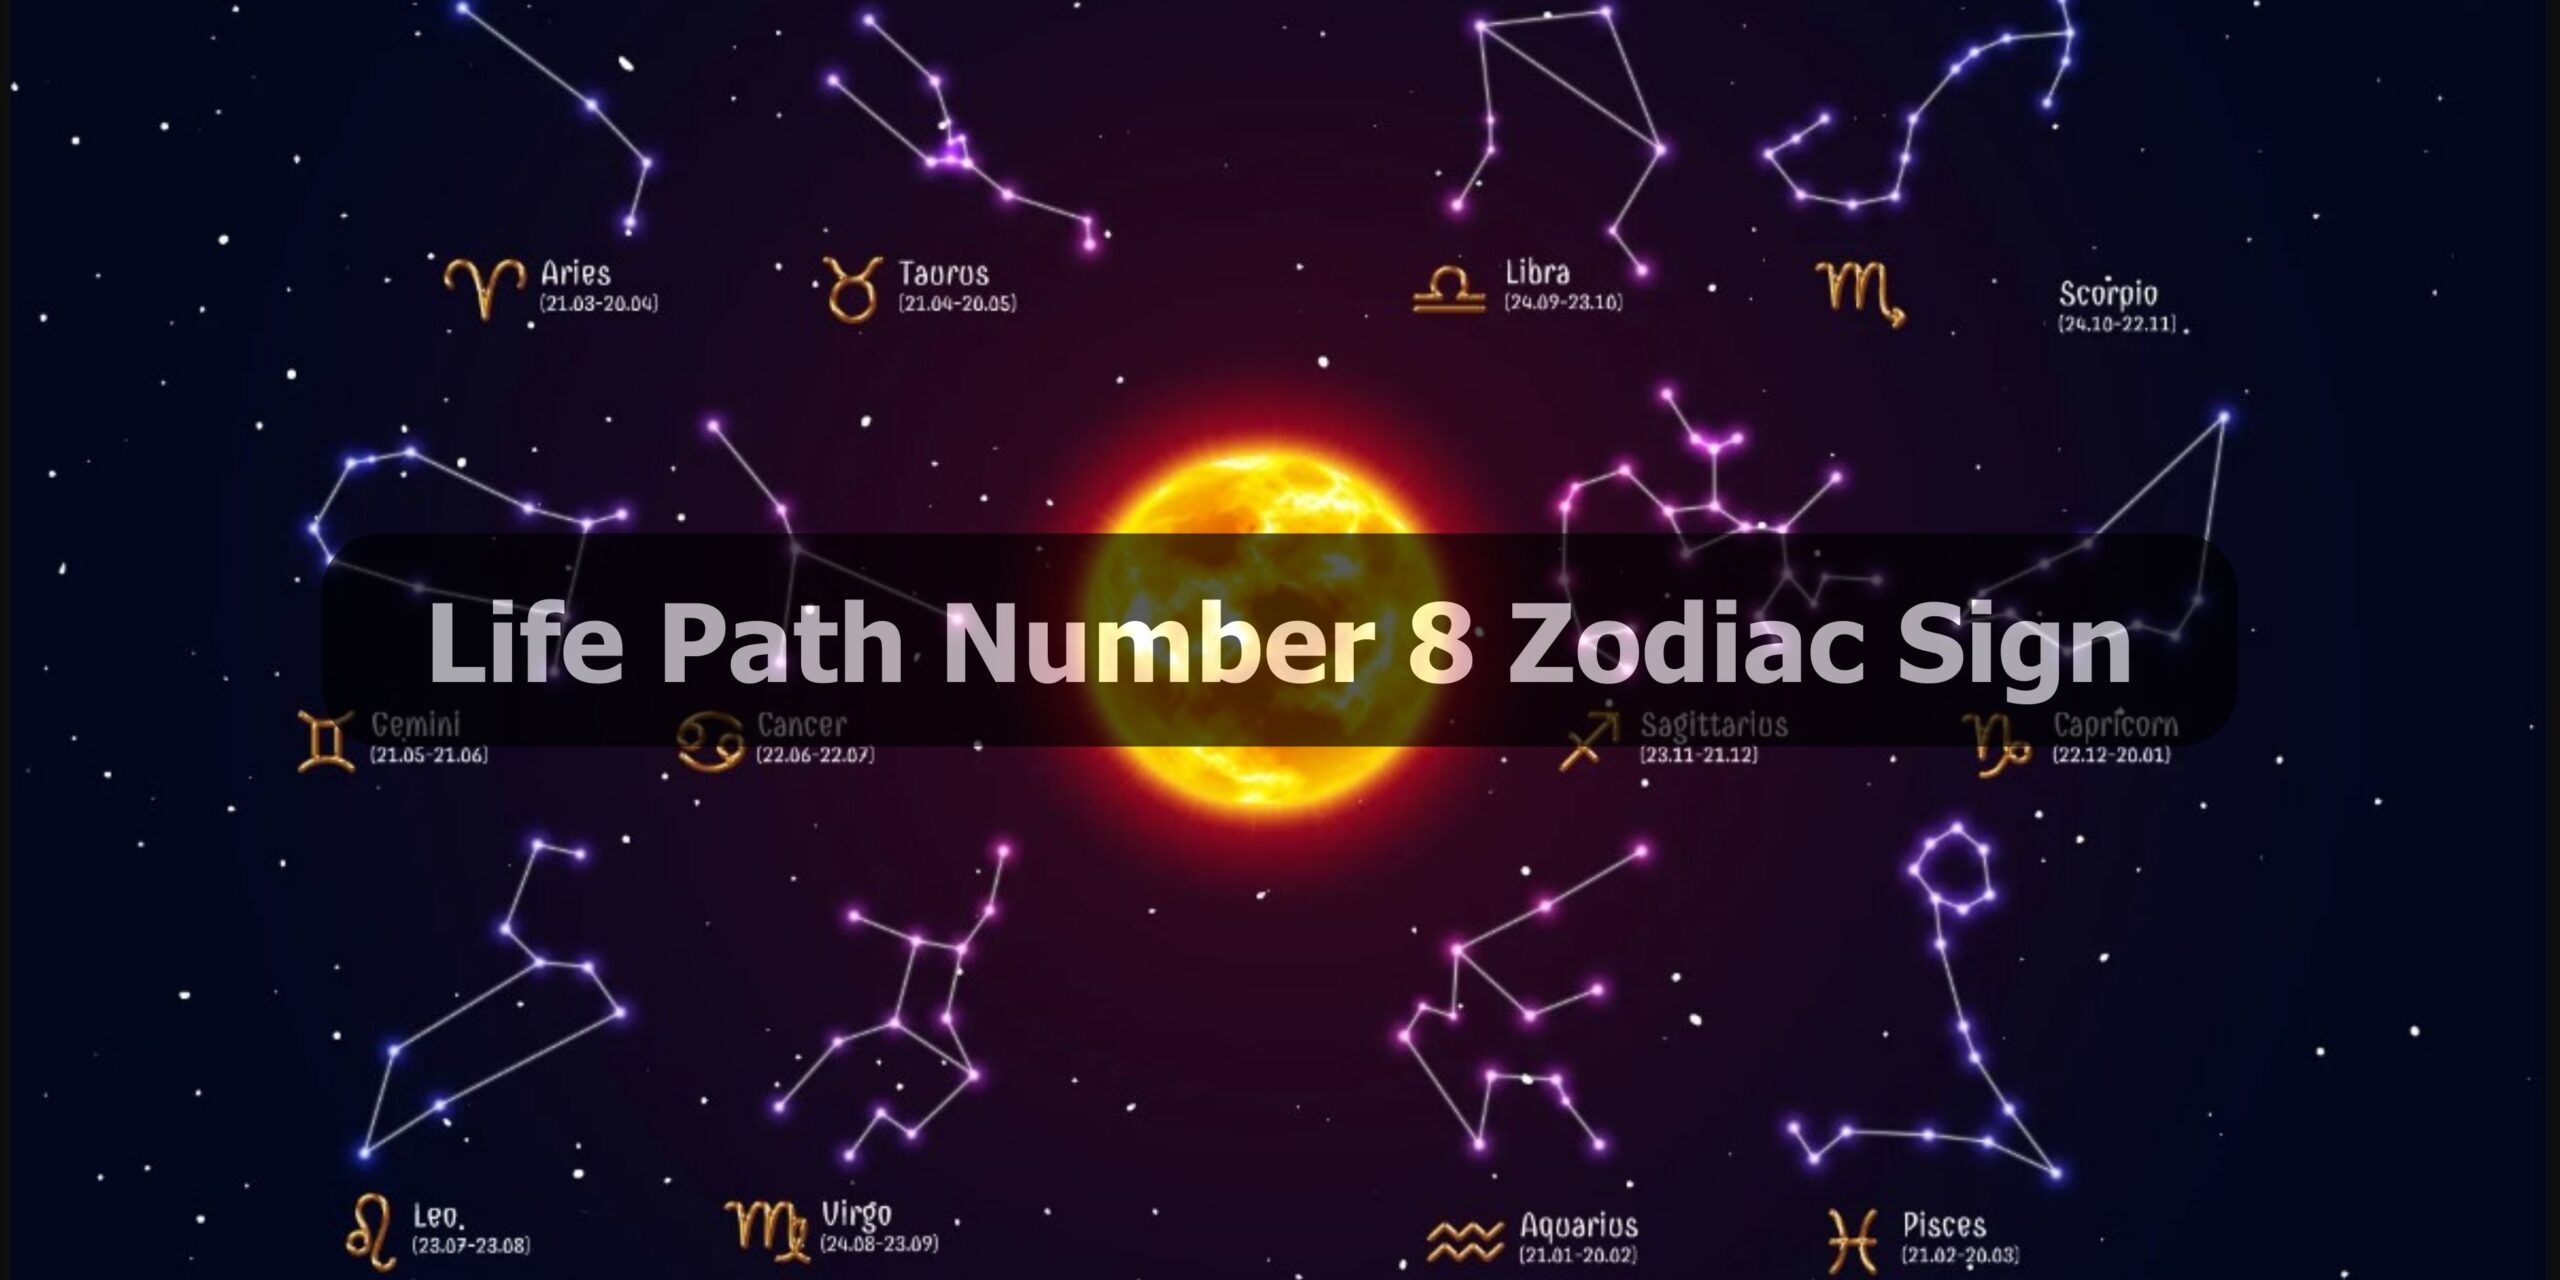 Life Path Number 8 Zodiac Sign